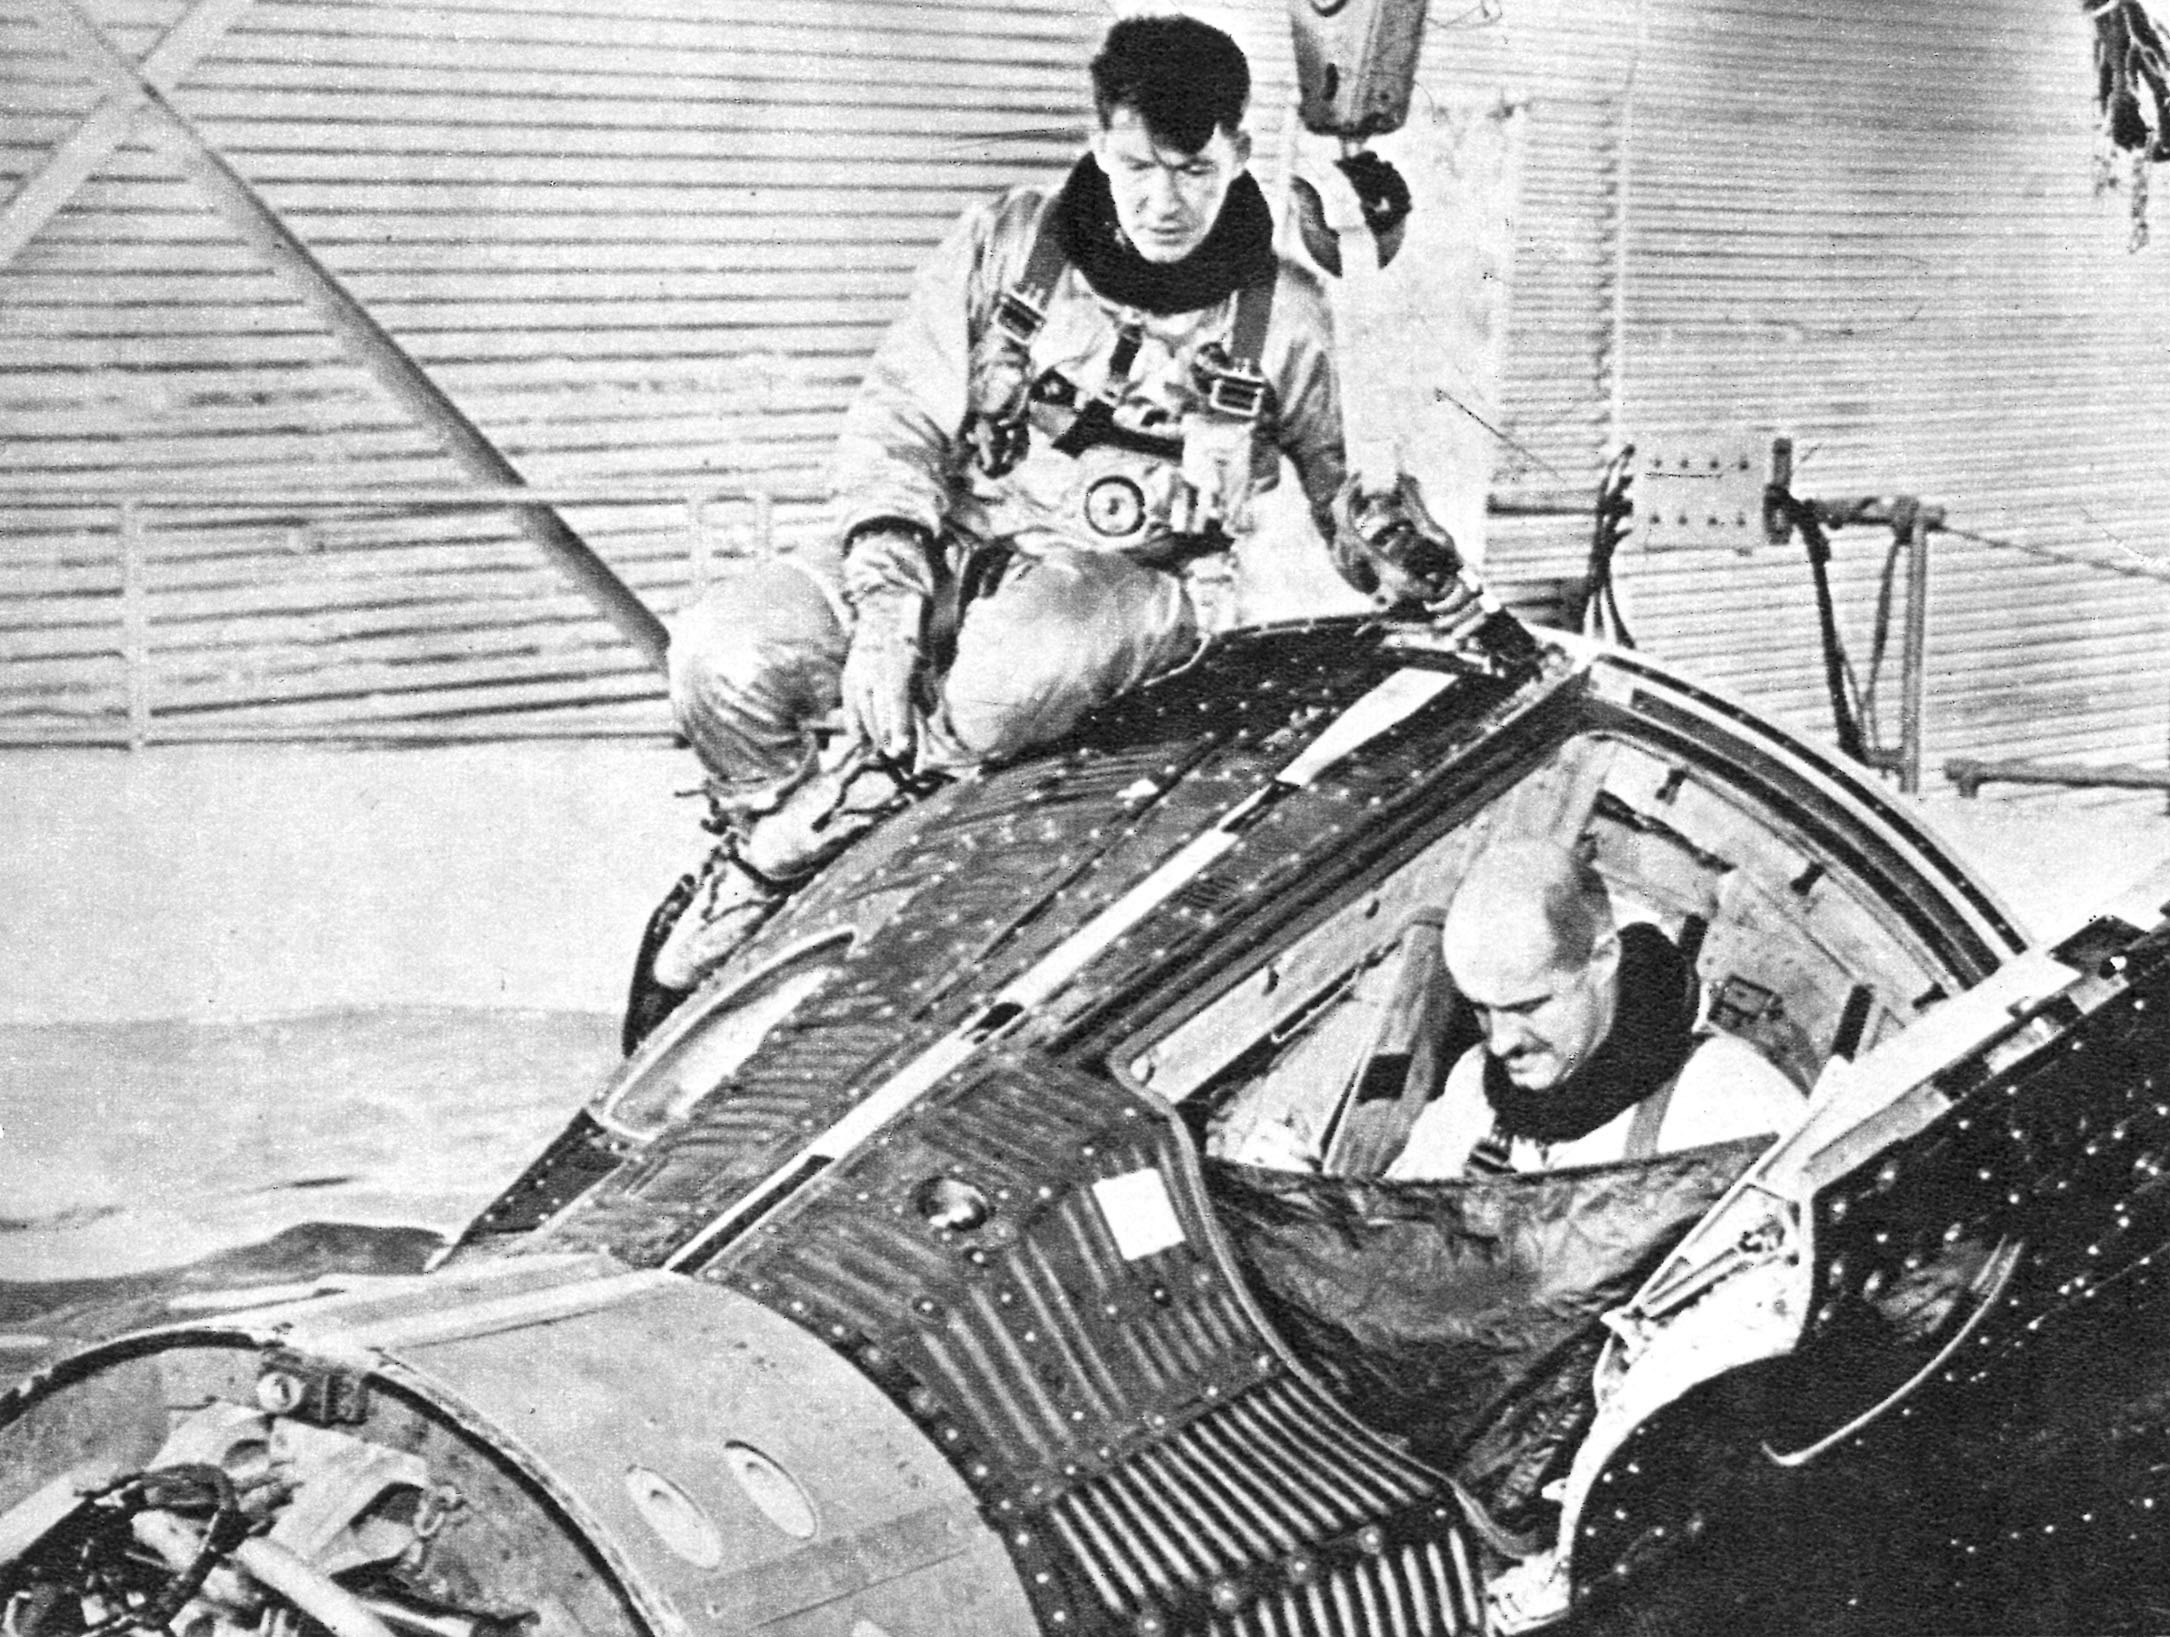 During training, Schirra balances the Gemini capsule while Stafford, right, his co-pilot, prepares to climb out of the capsule.